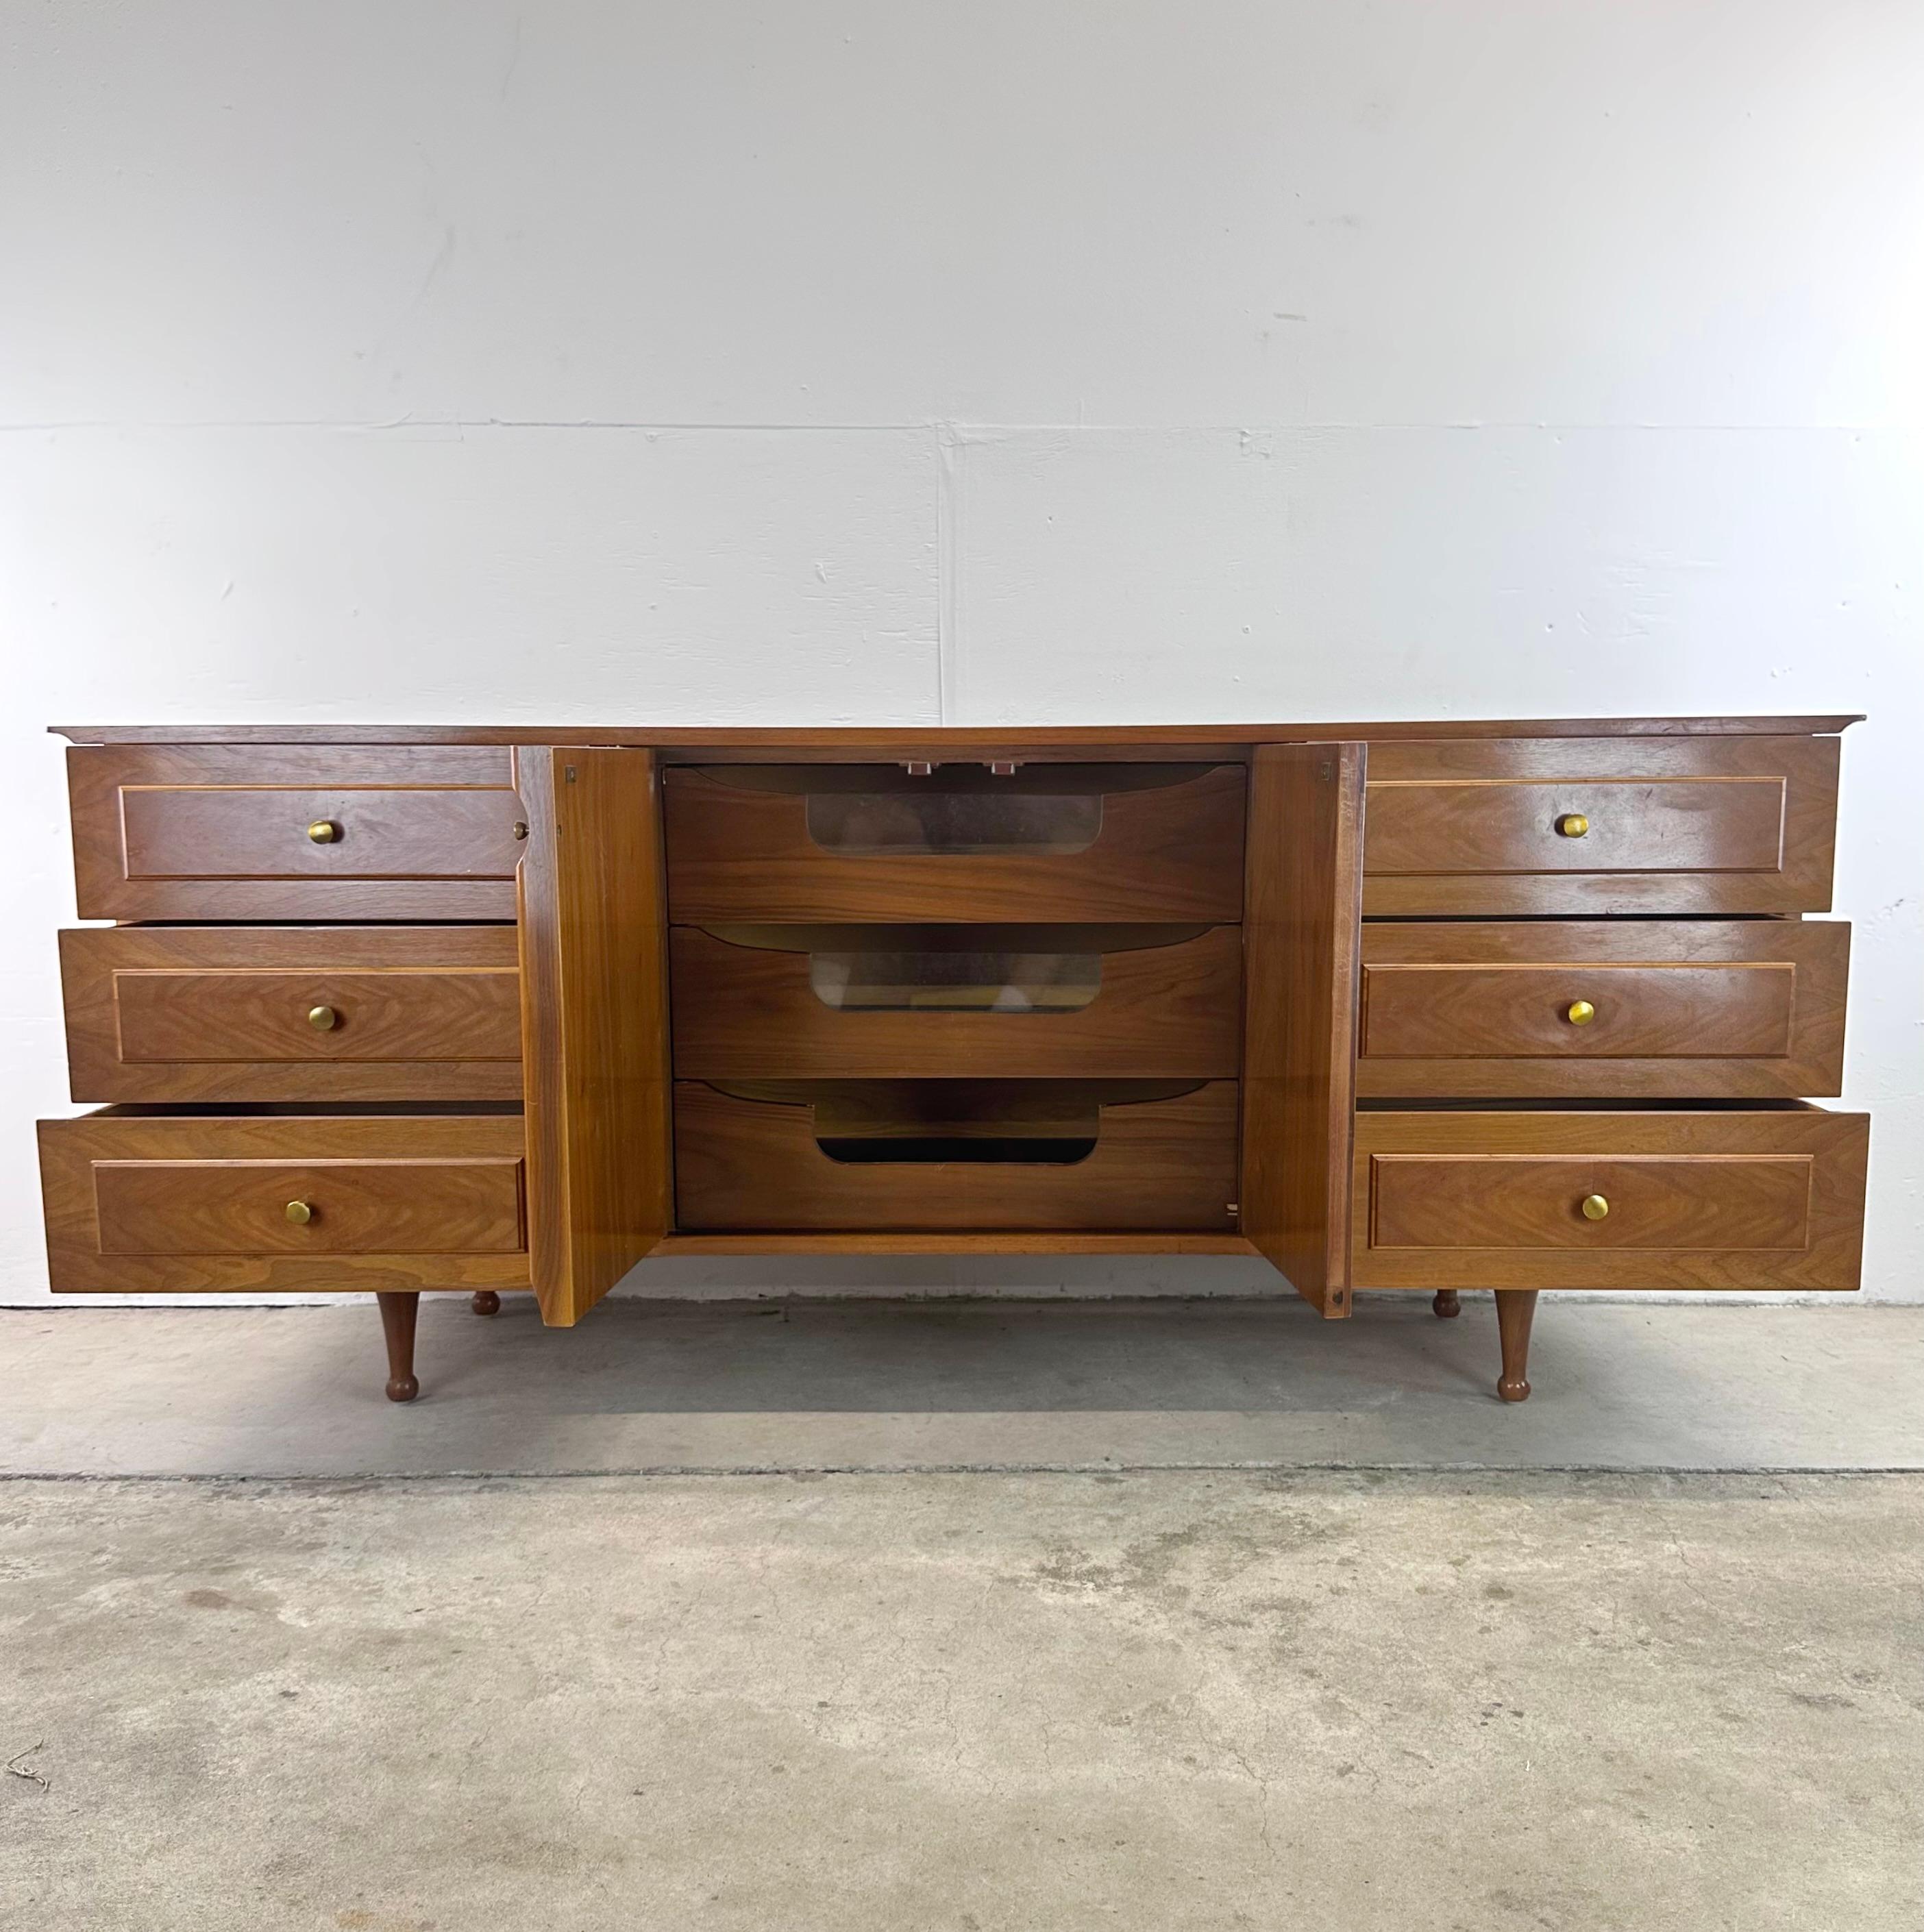 This Mid-Century Nine Drawer Lowboy Dresser is a remarkable piece that seamlessly merges timeless elegance with modern functionality. Crafted with meticulous attention to detail, this dresser is a tribute to the golden era of mid-century design and